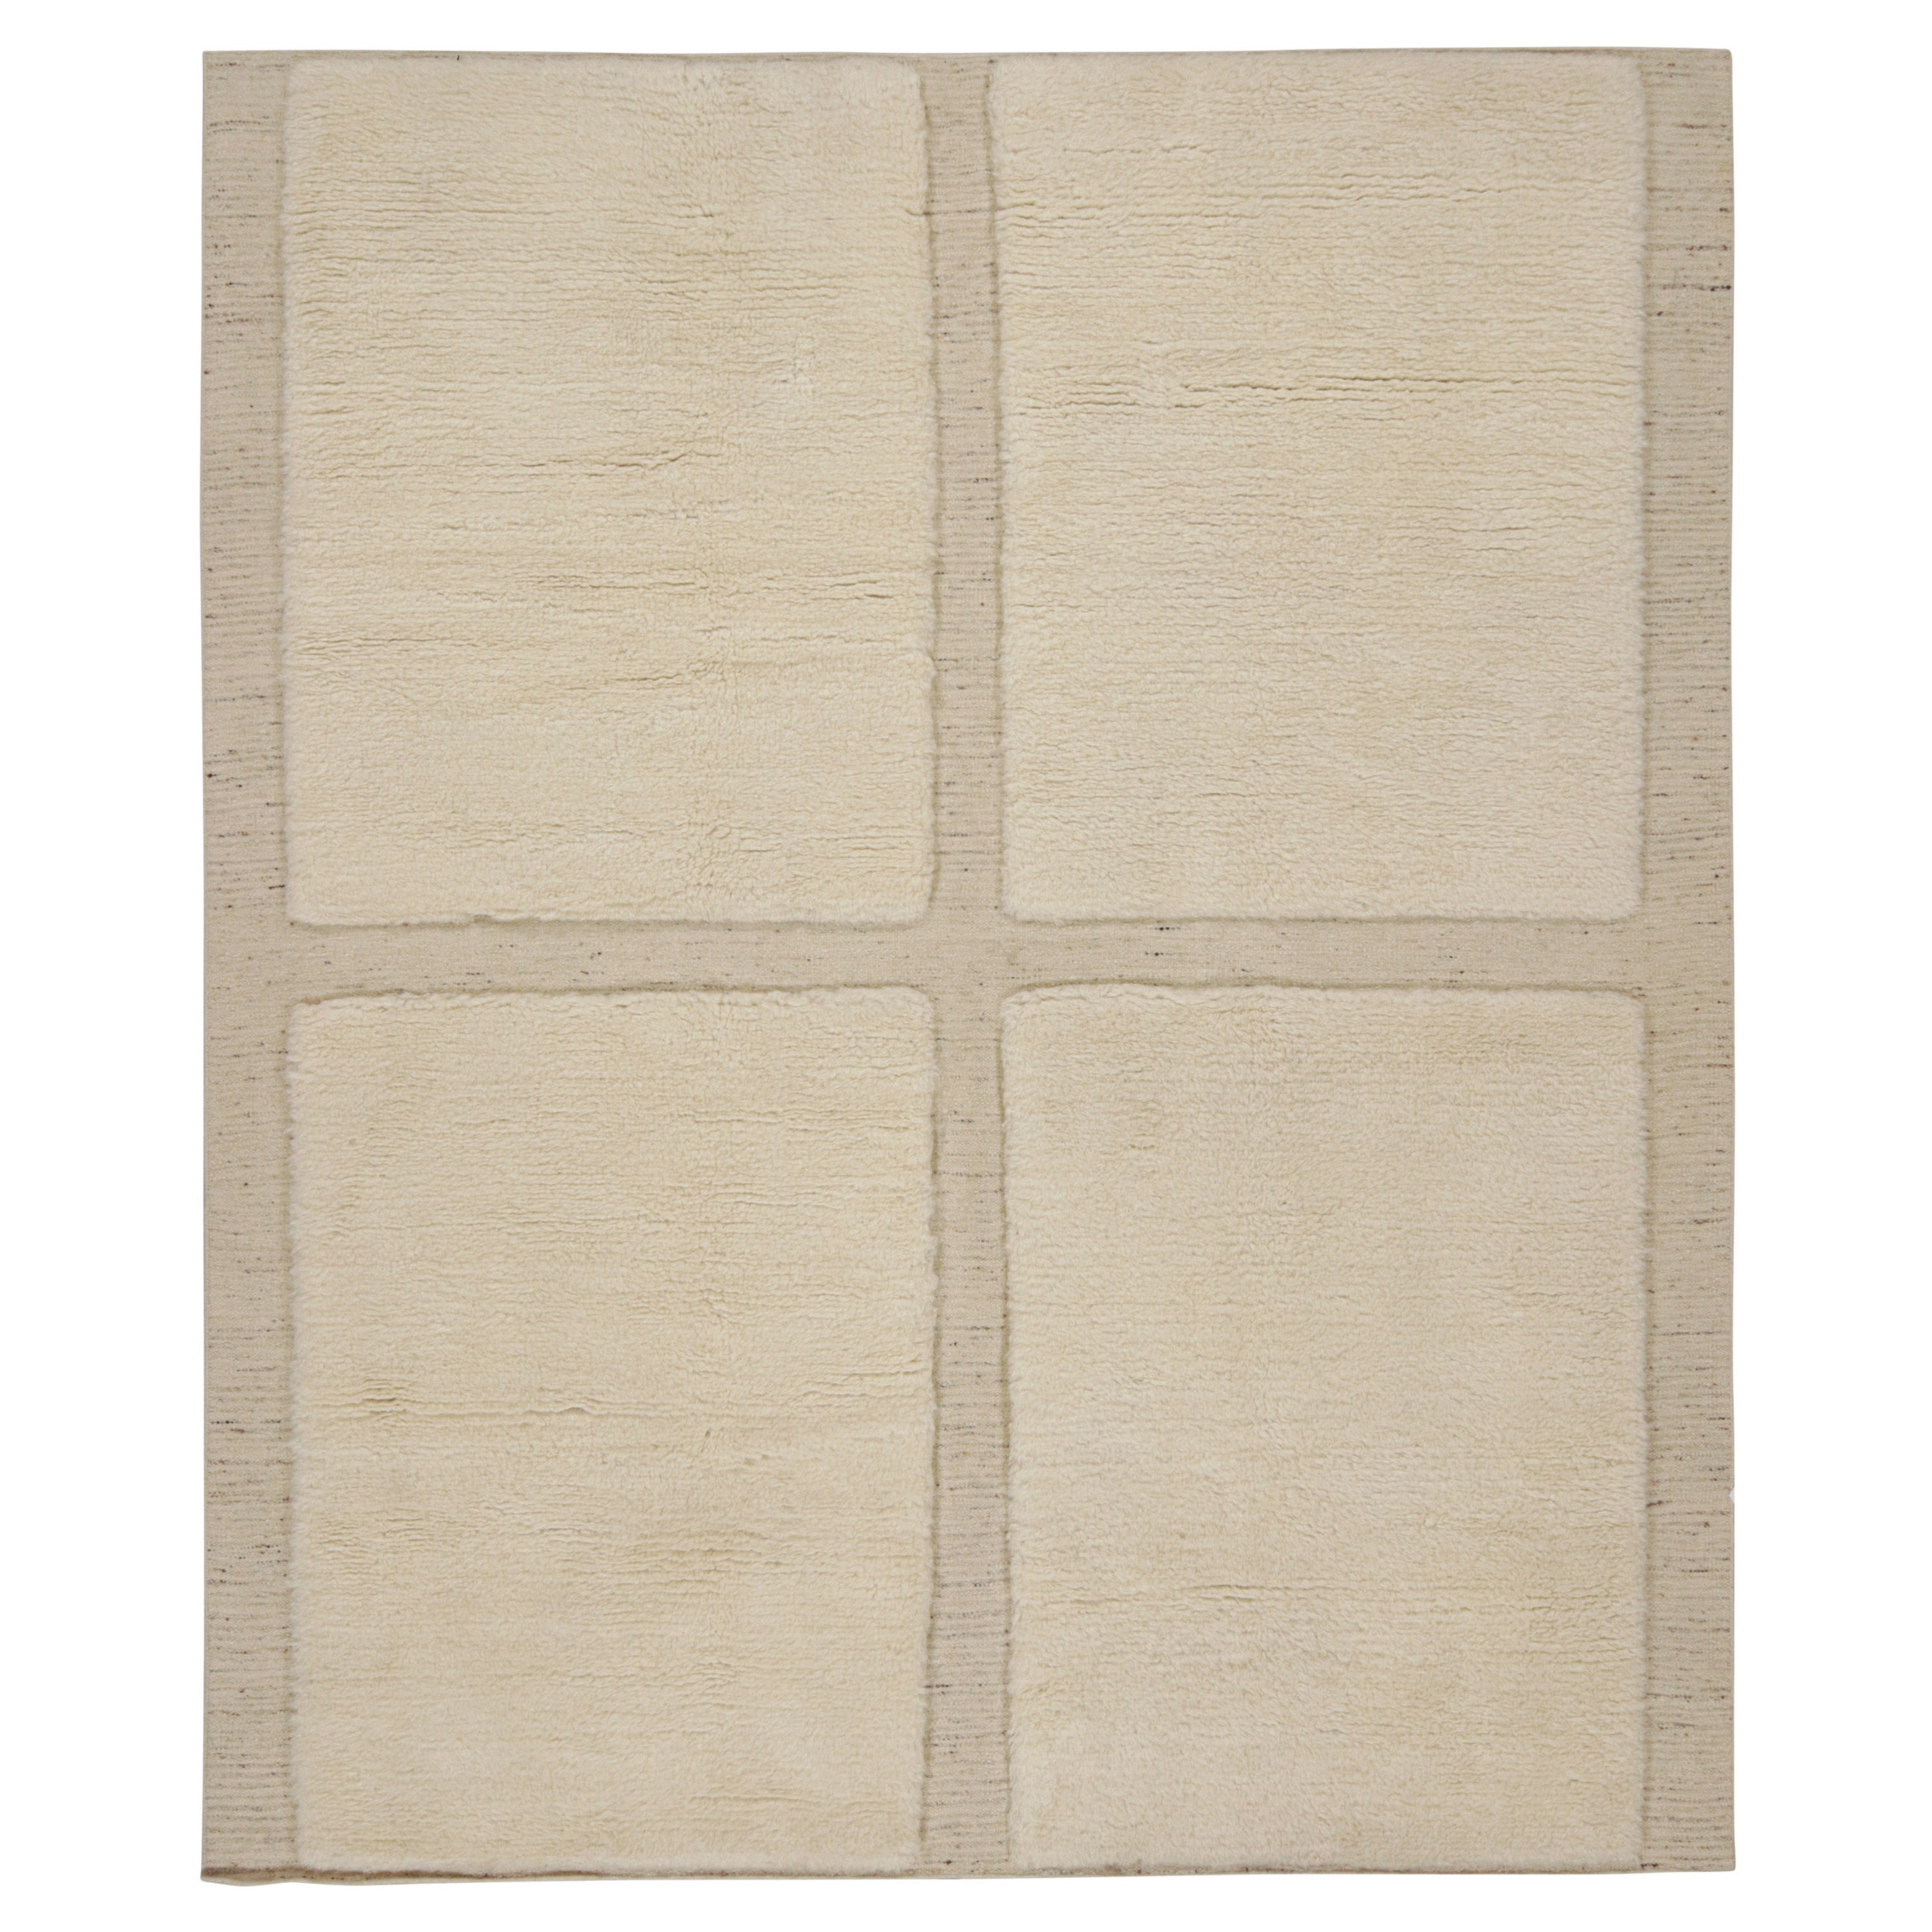 Rug & Kilim’s Moroccan Style Rug with Cream Tone High-Pile Geometric Patterns For Sale